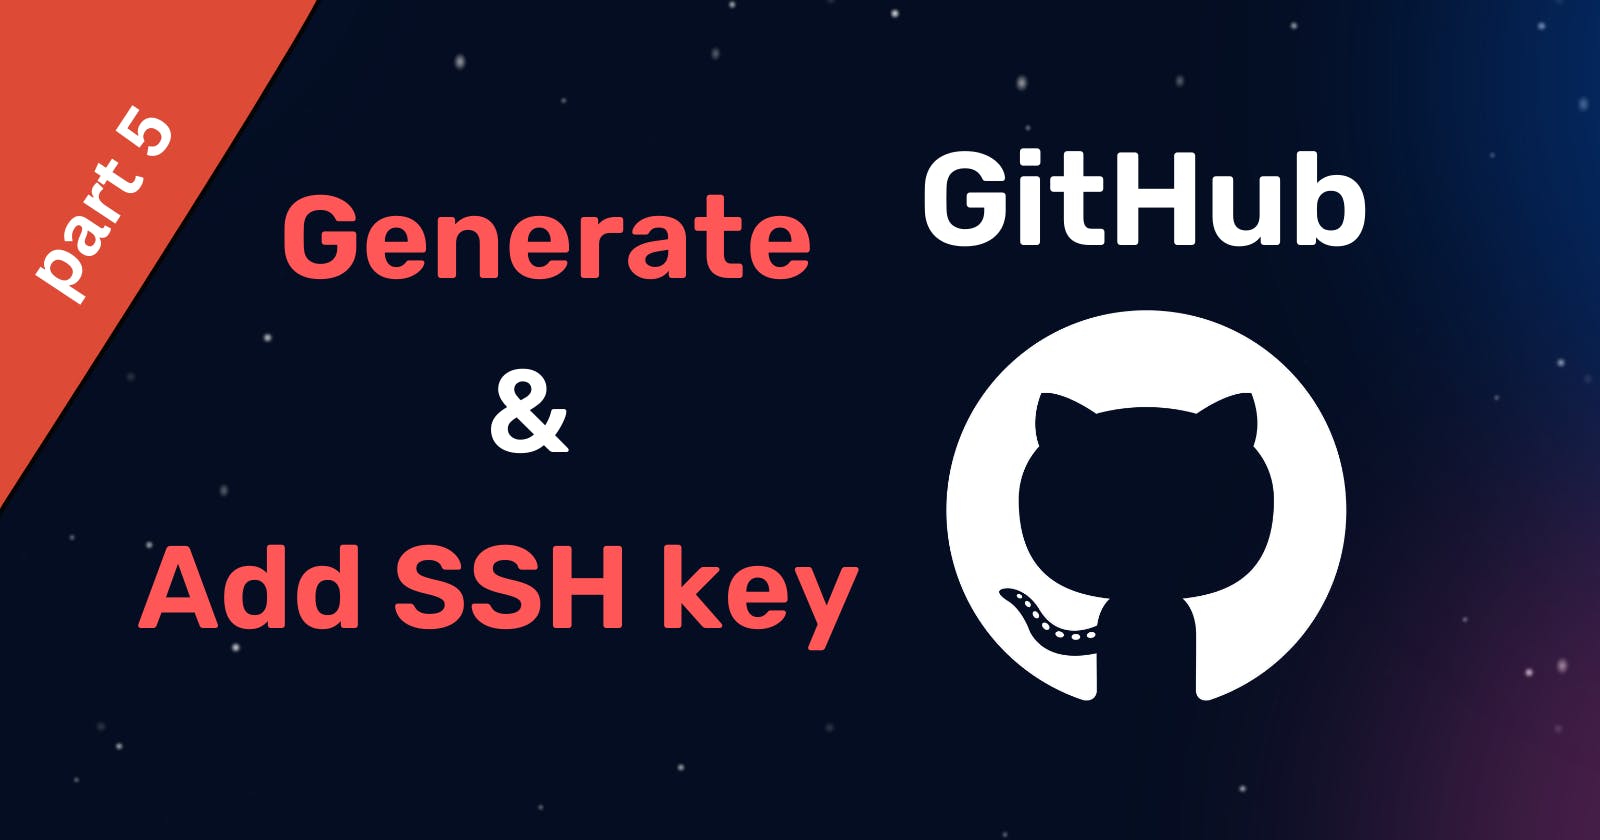 How to Generate and add an SSH key to GitHub